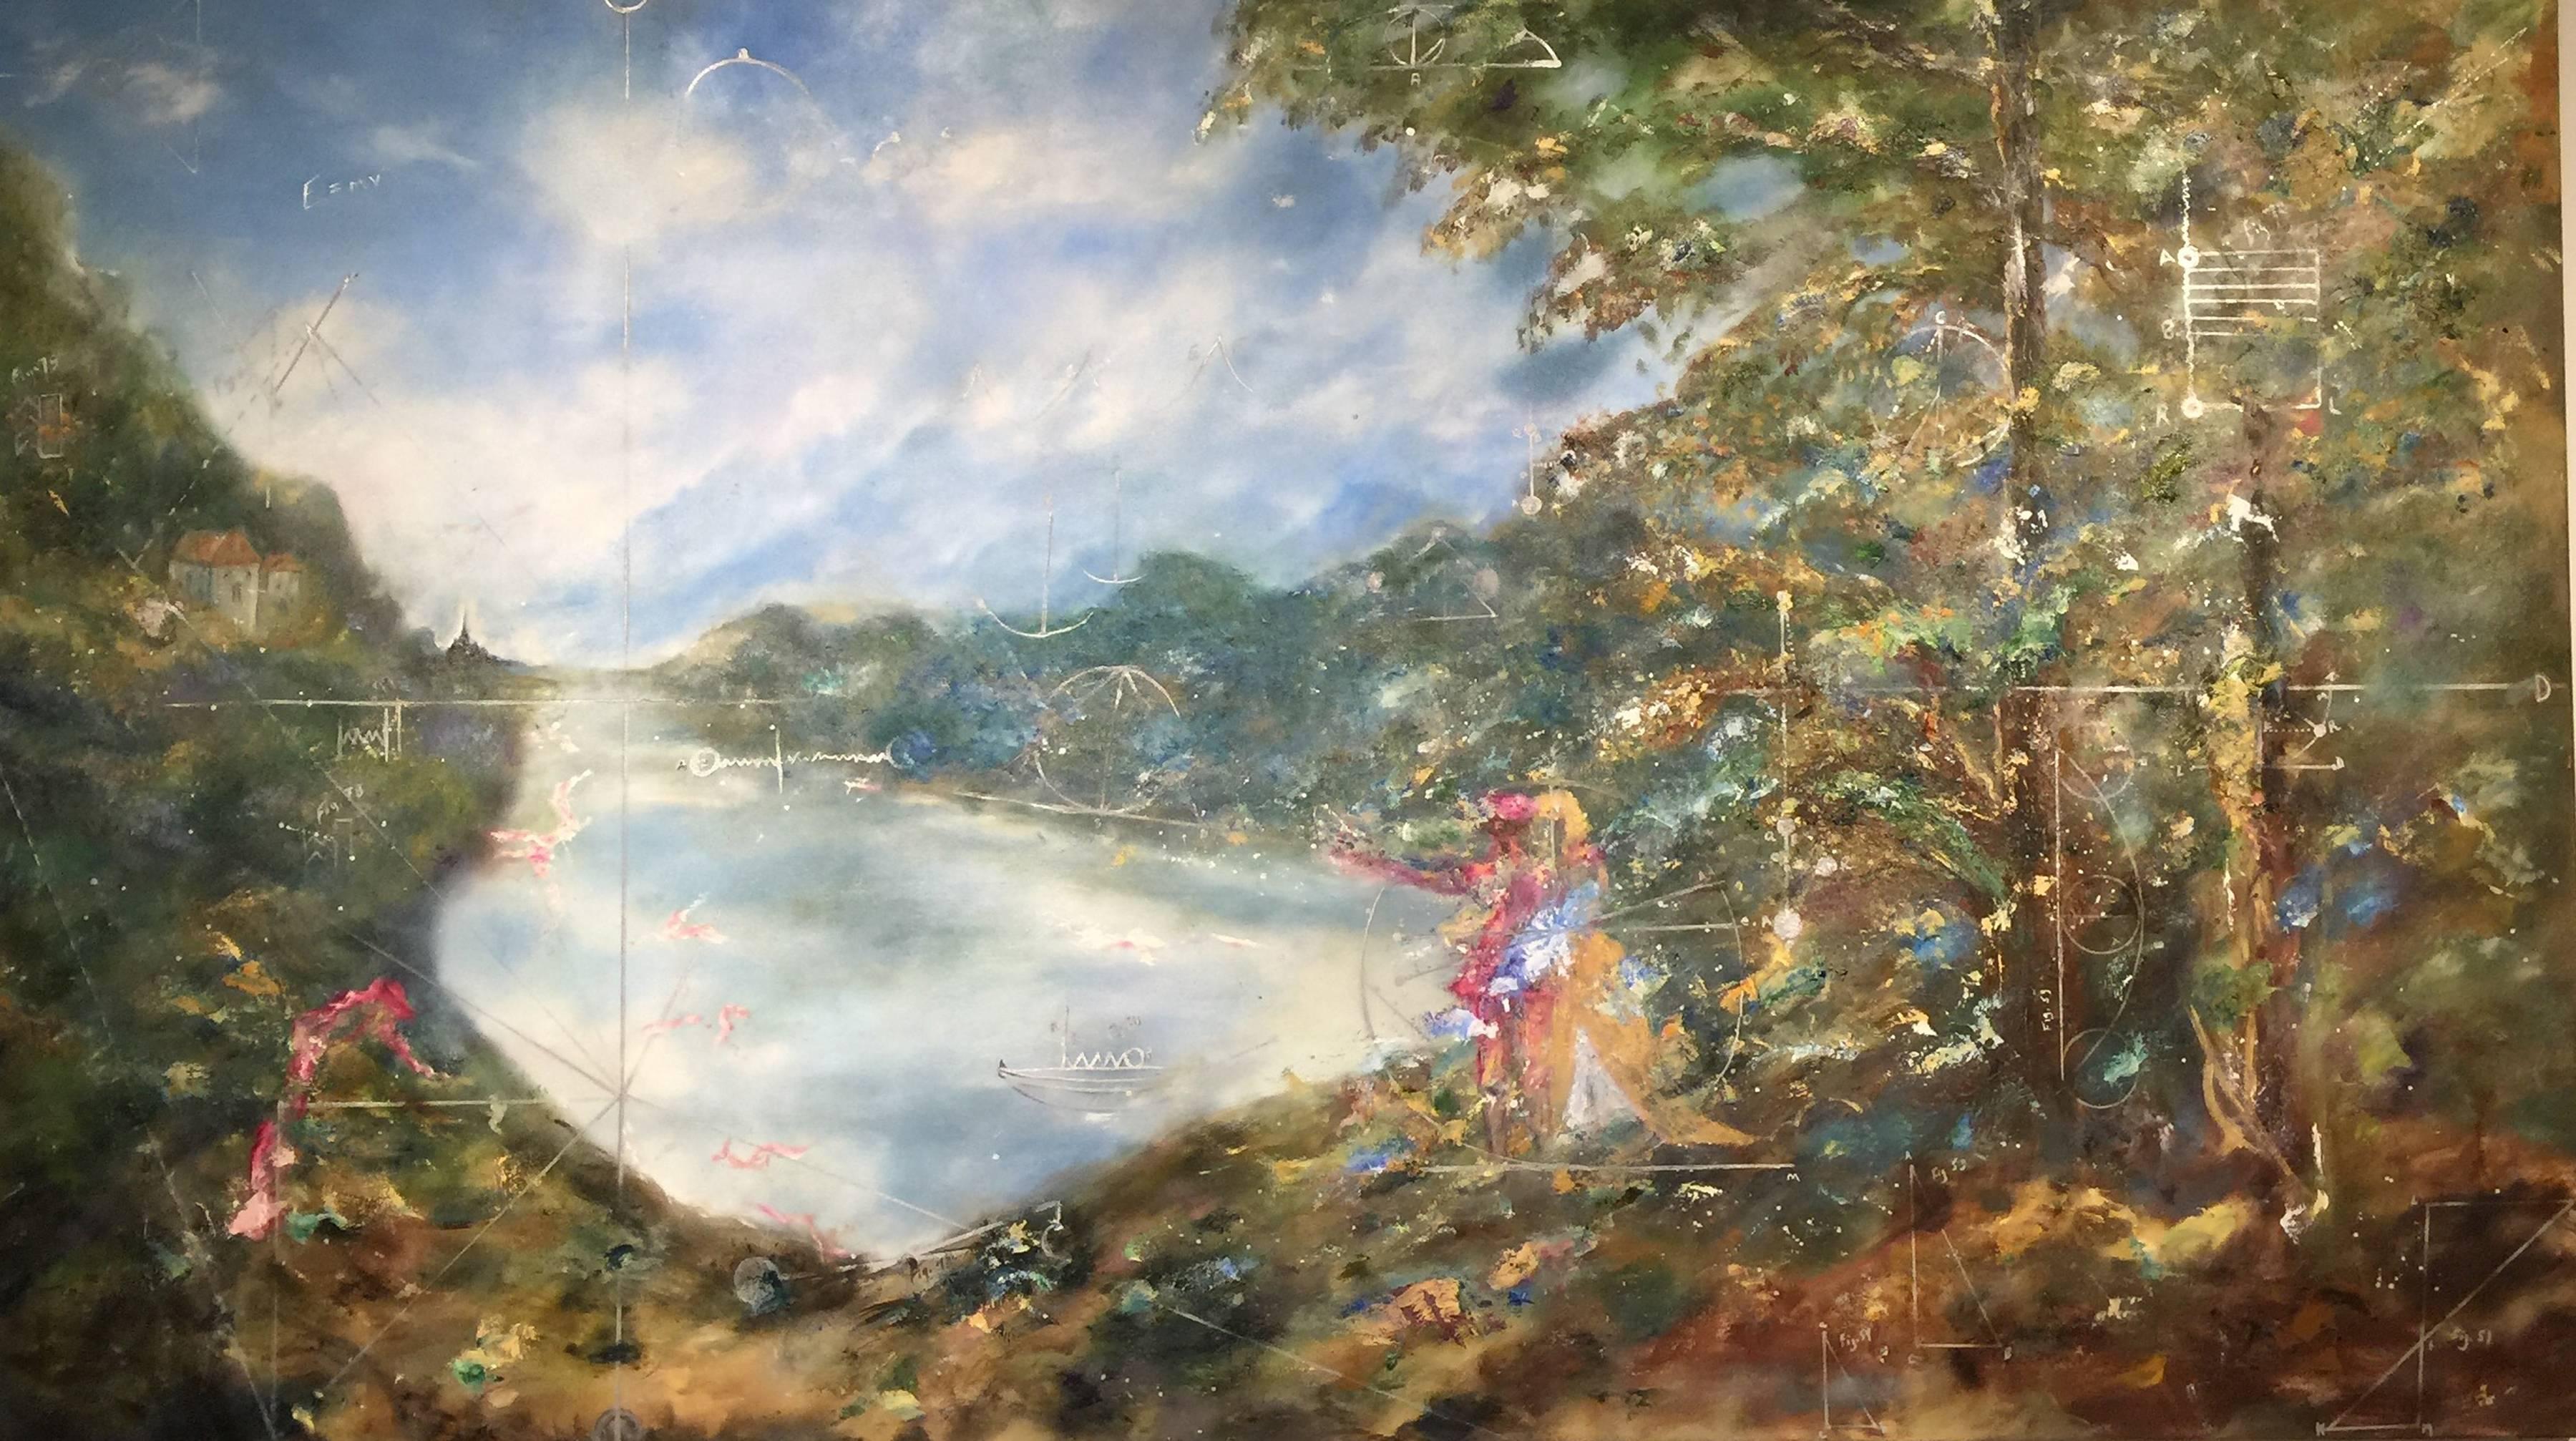 Émilie du Châtelet - A stroll with Voltaire - Contemporary Painting by Arica Hilton